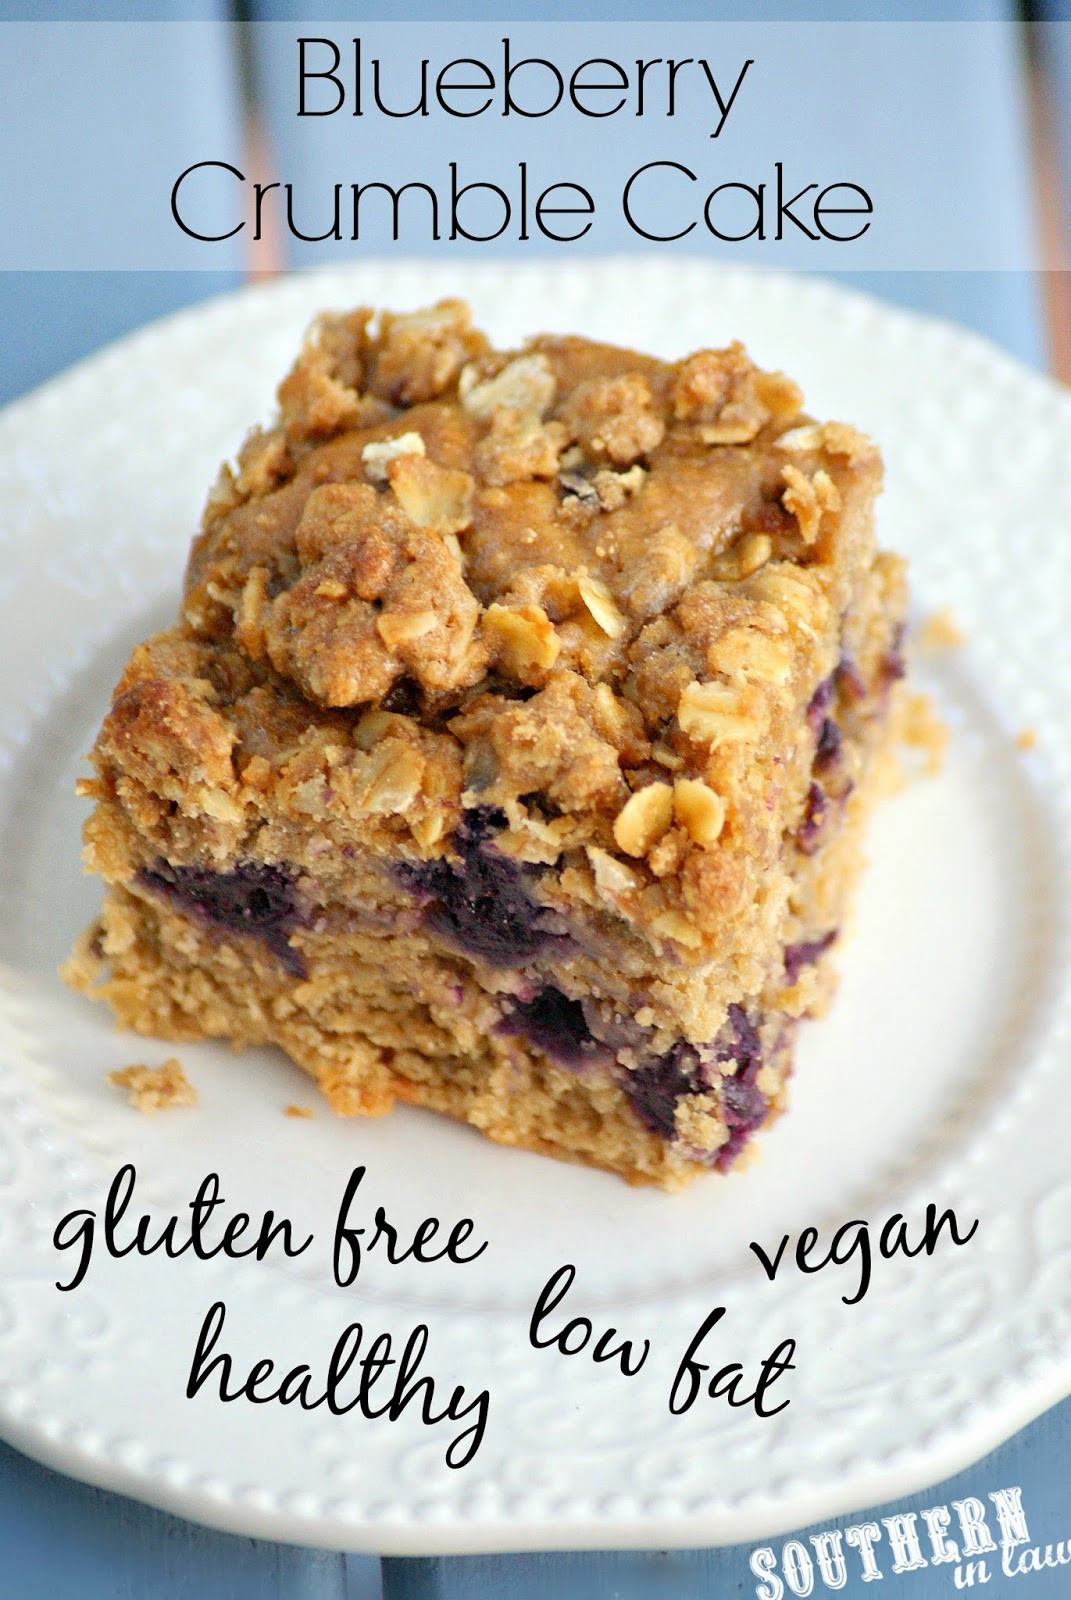 Low Sugar Low Fat Desserts
 Southern In Law Recipe Healthy Blueberry Crumble Cake